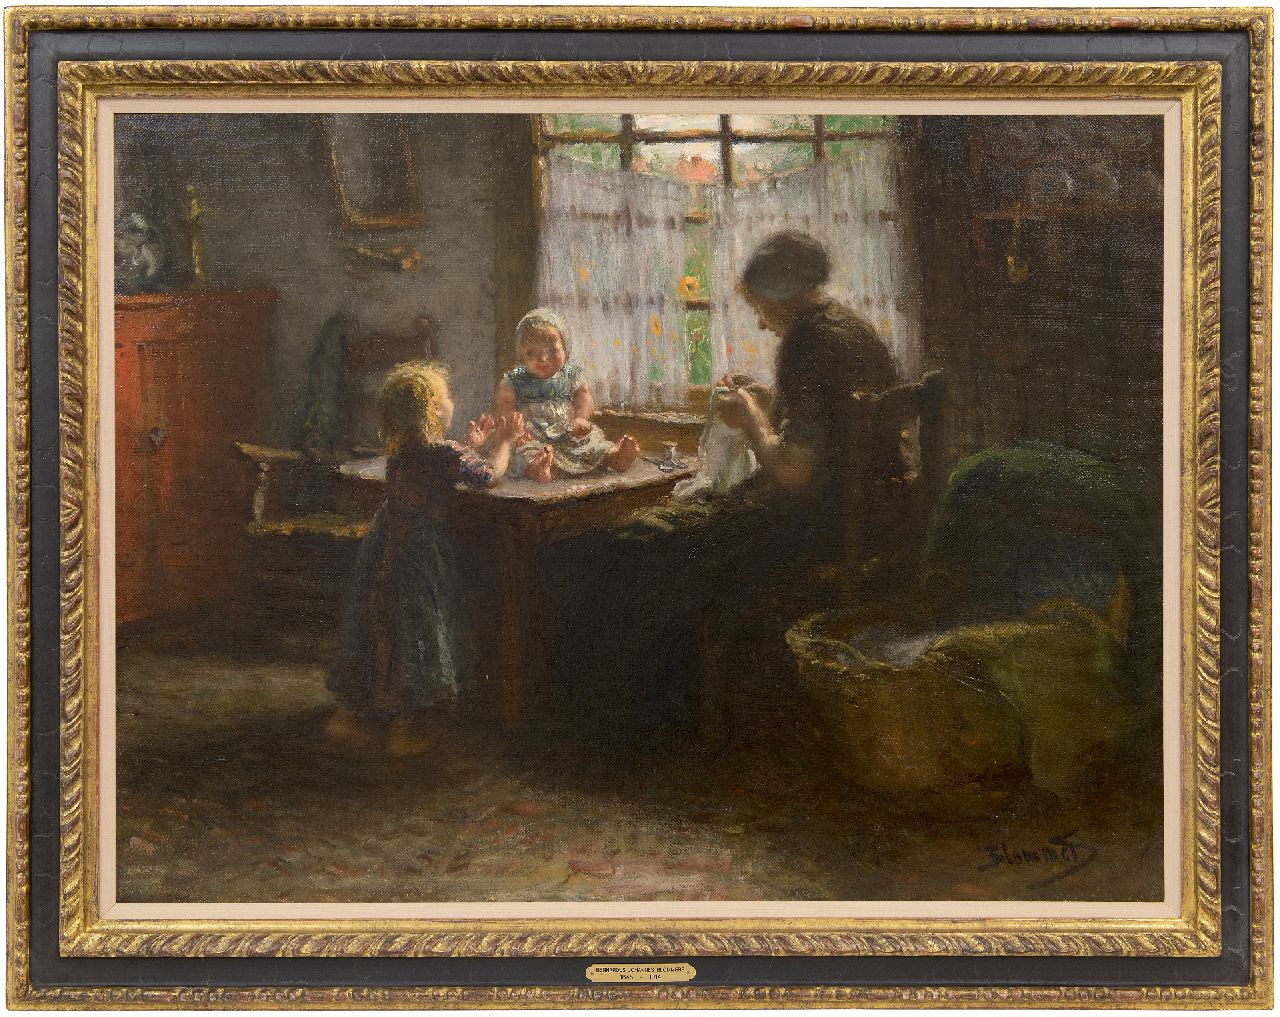 Blommers B.J.  | Bernardus Johannes 'Bernard' Blommers | Paintings offered for sale | Together at te table, oil on canvas 55.6 x 73.7 cm, signed l.r.